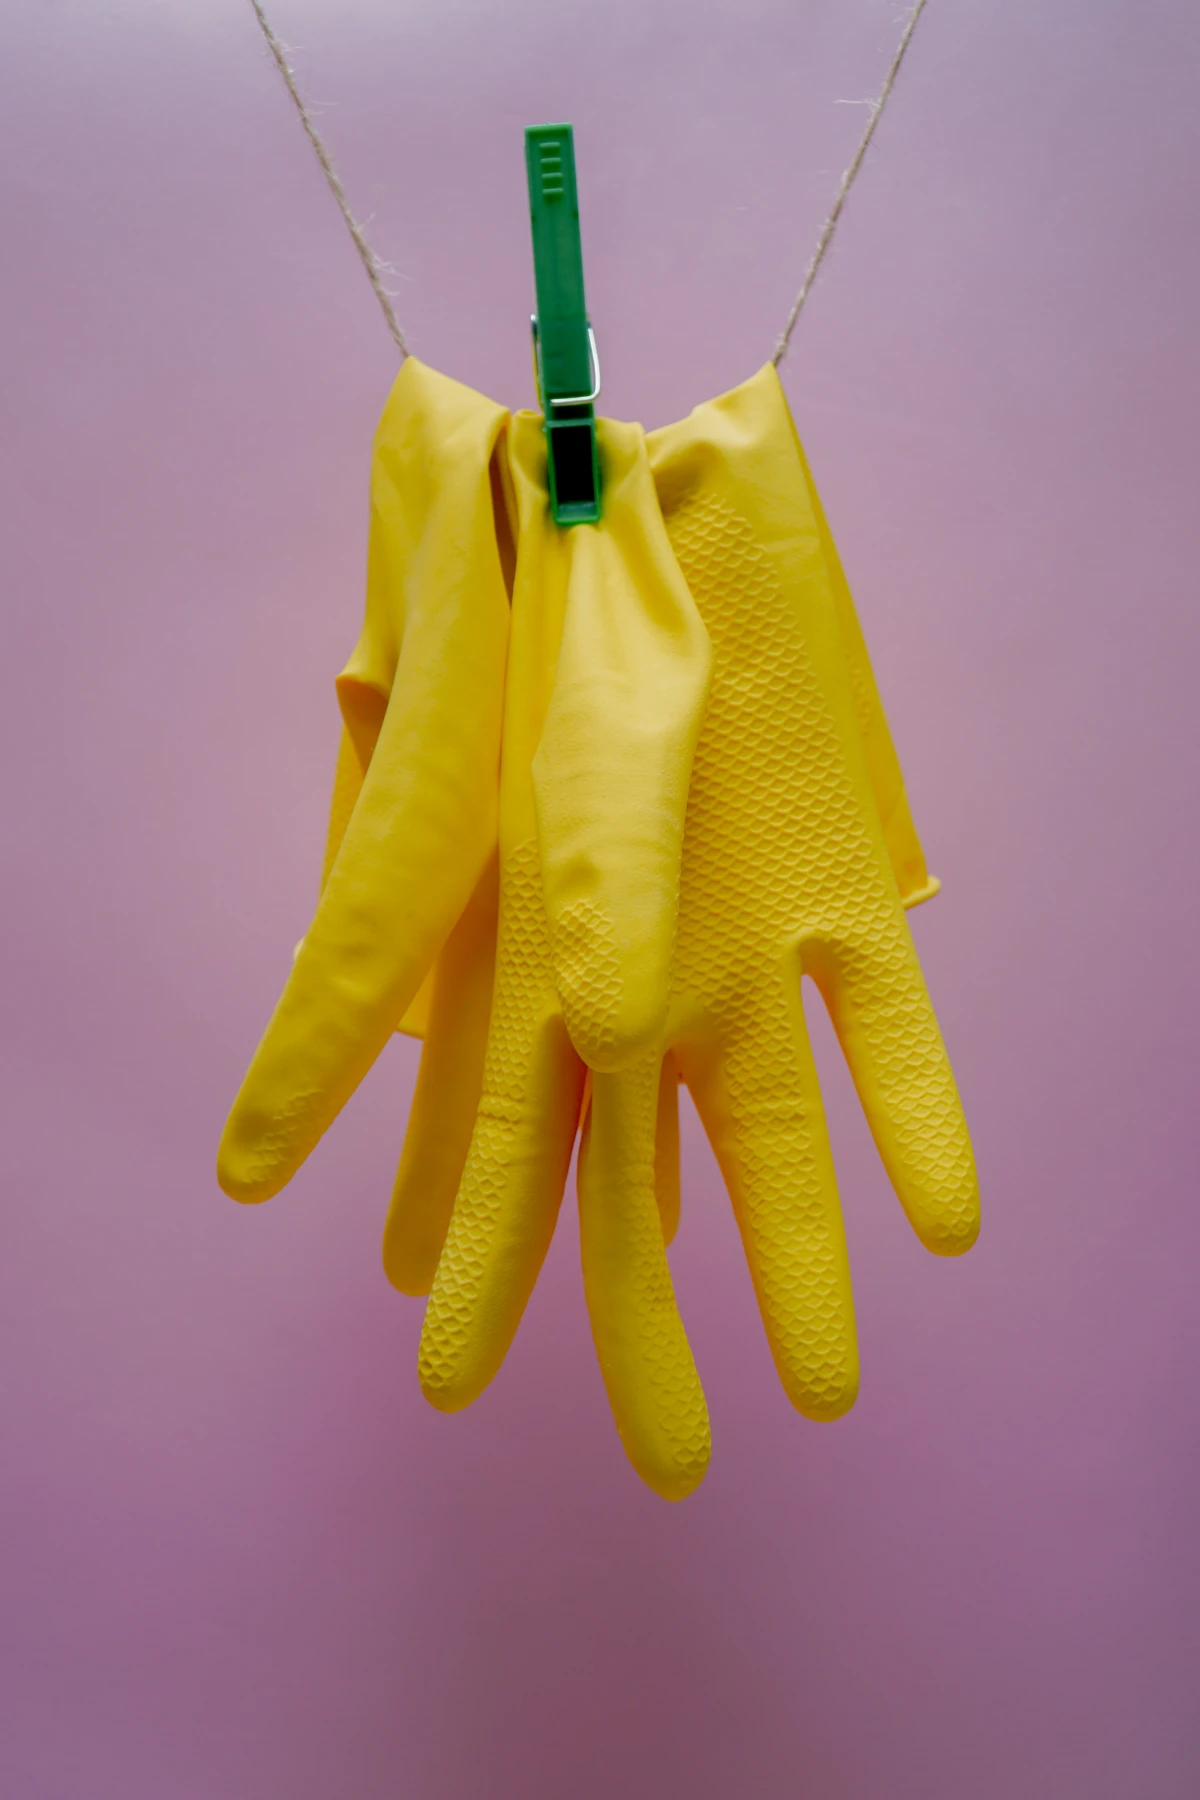 cleaning gloves on a washing cloth